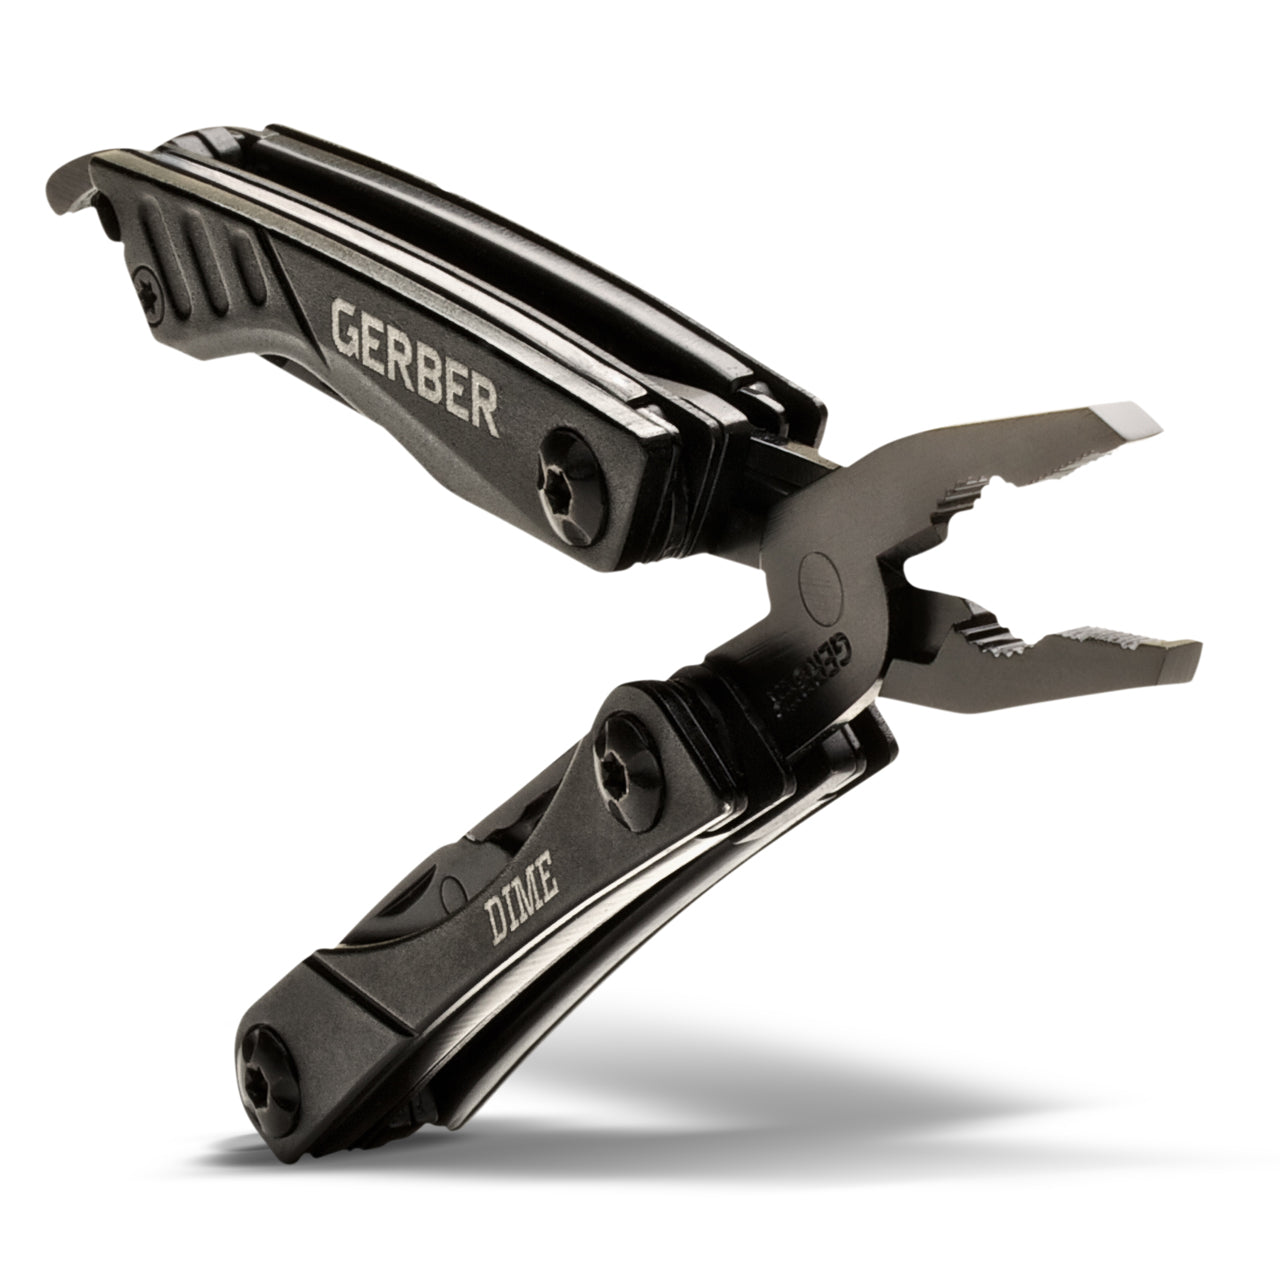 The idea is simple: always be prepared. The Dime is a mini multi-tool with an impressive list of features, ensuring you are ready for anything. This butterfly open tool fits on your keychain yet has 12 useful tools. Available in multiple colors and a bladeless version as well. www.defenceqstore.com.au